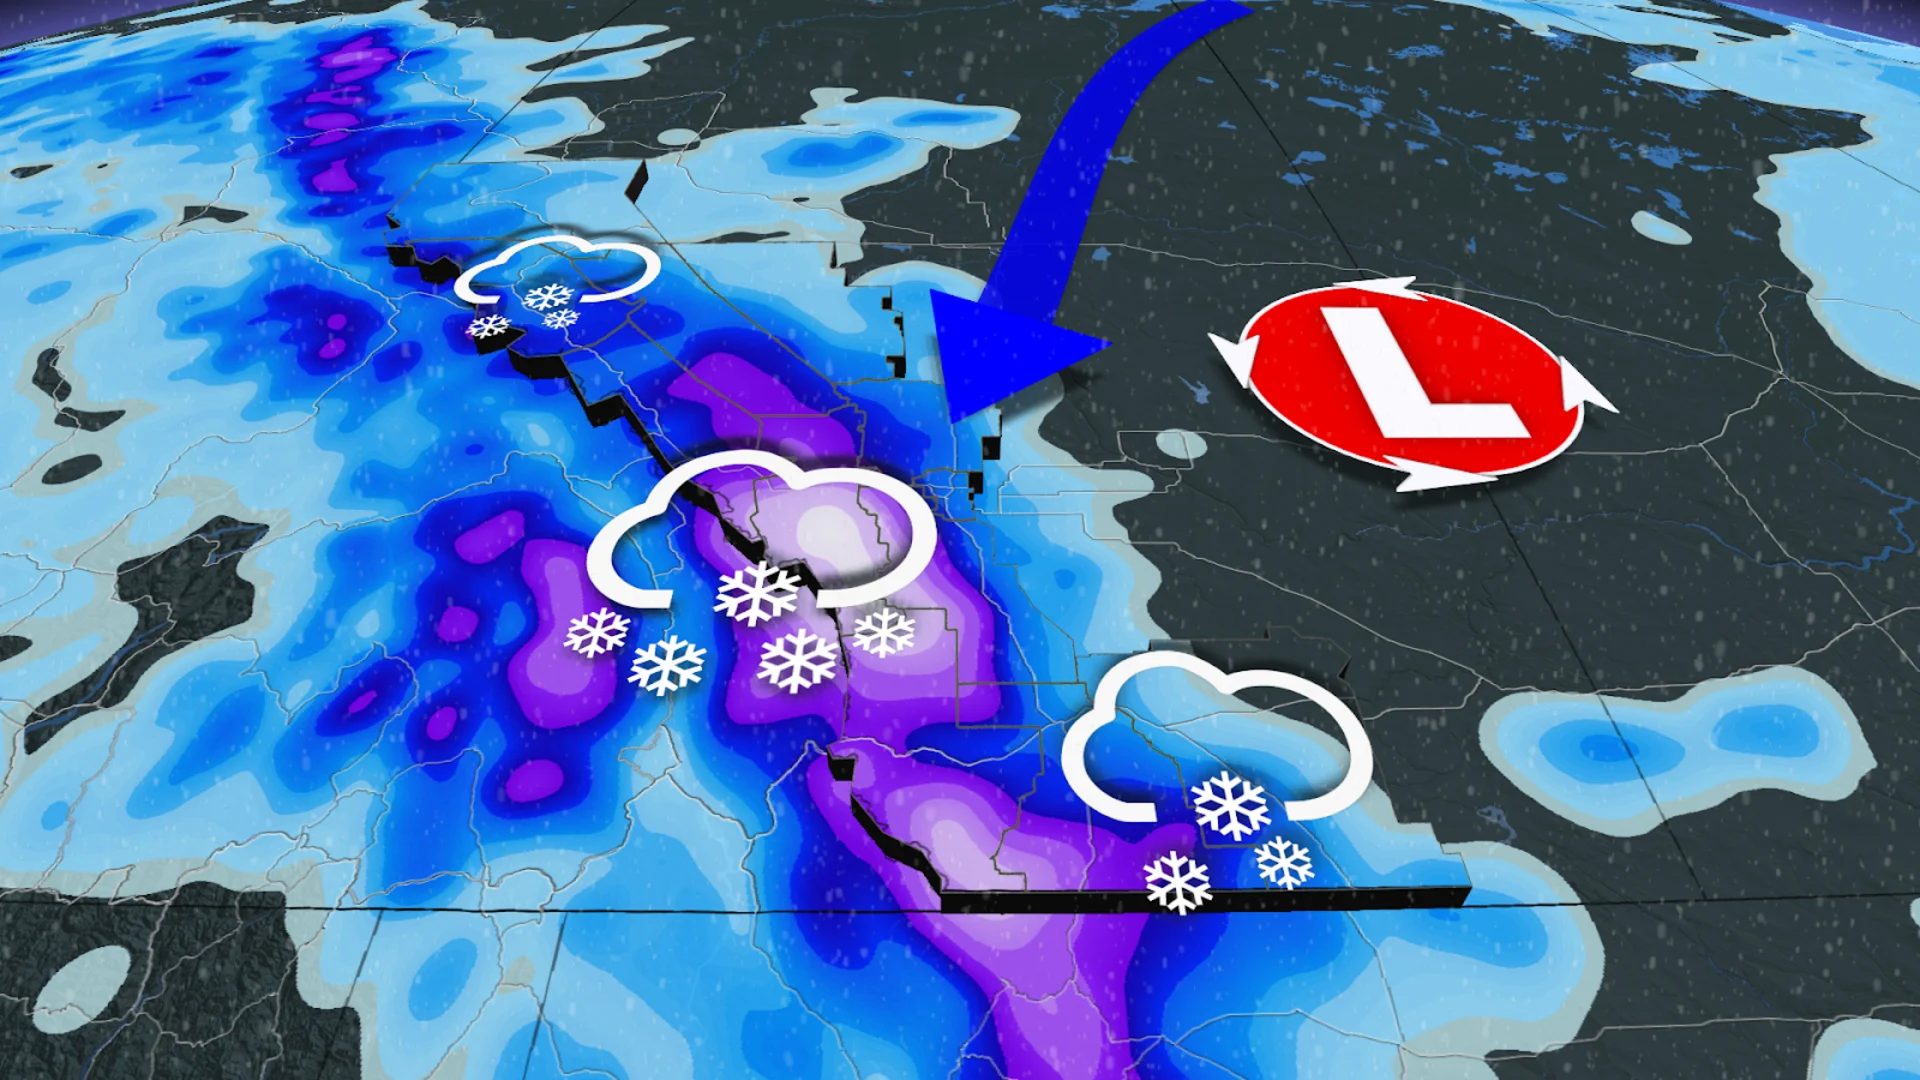 Up to 40 cm of snow is possible around Calgary this week as we head into a new month. See the full forecast, here